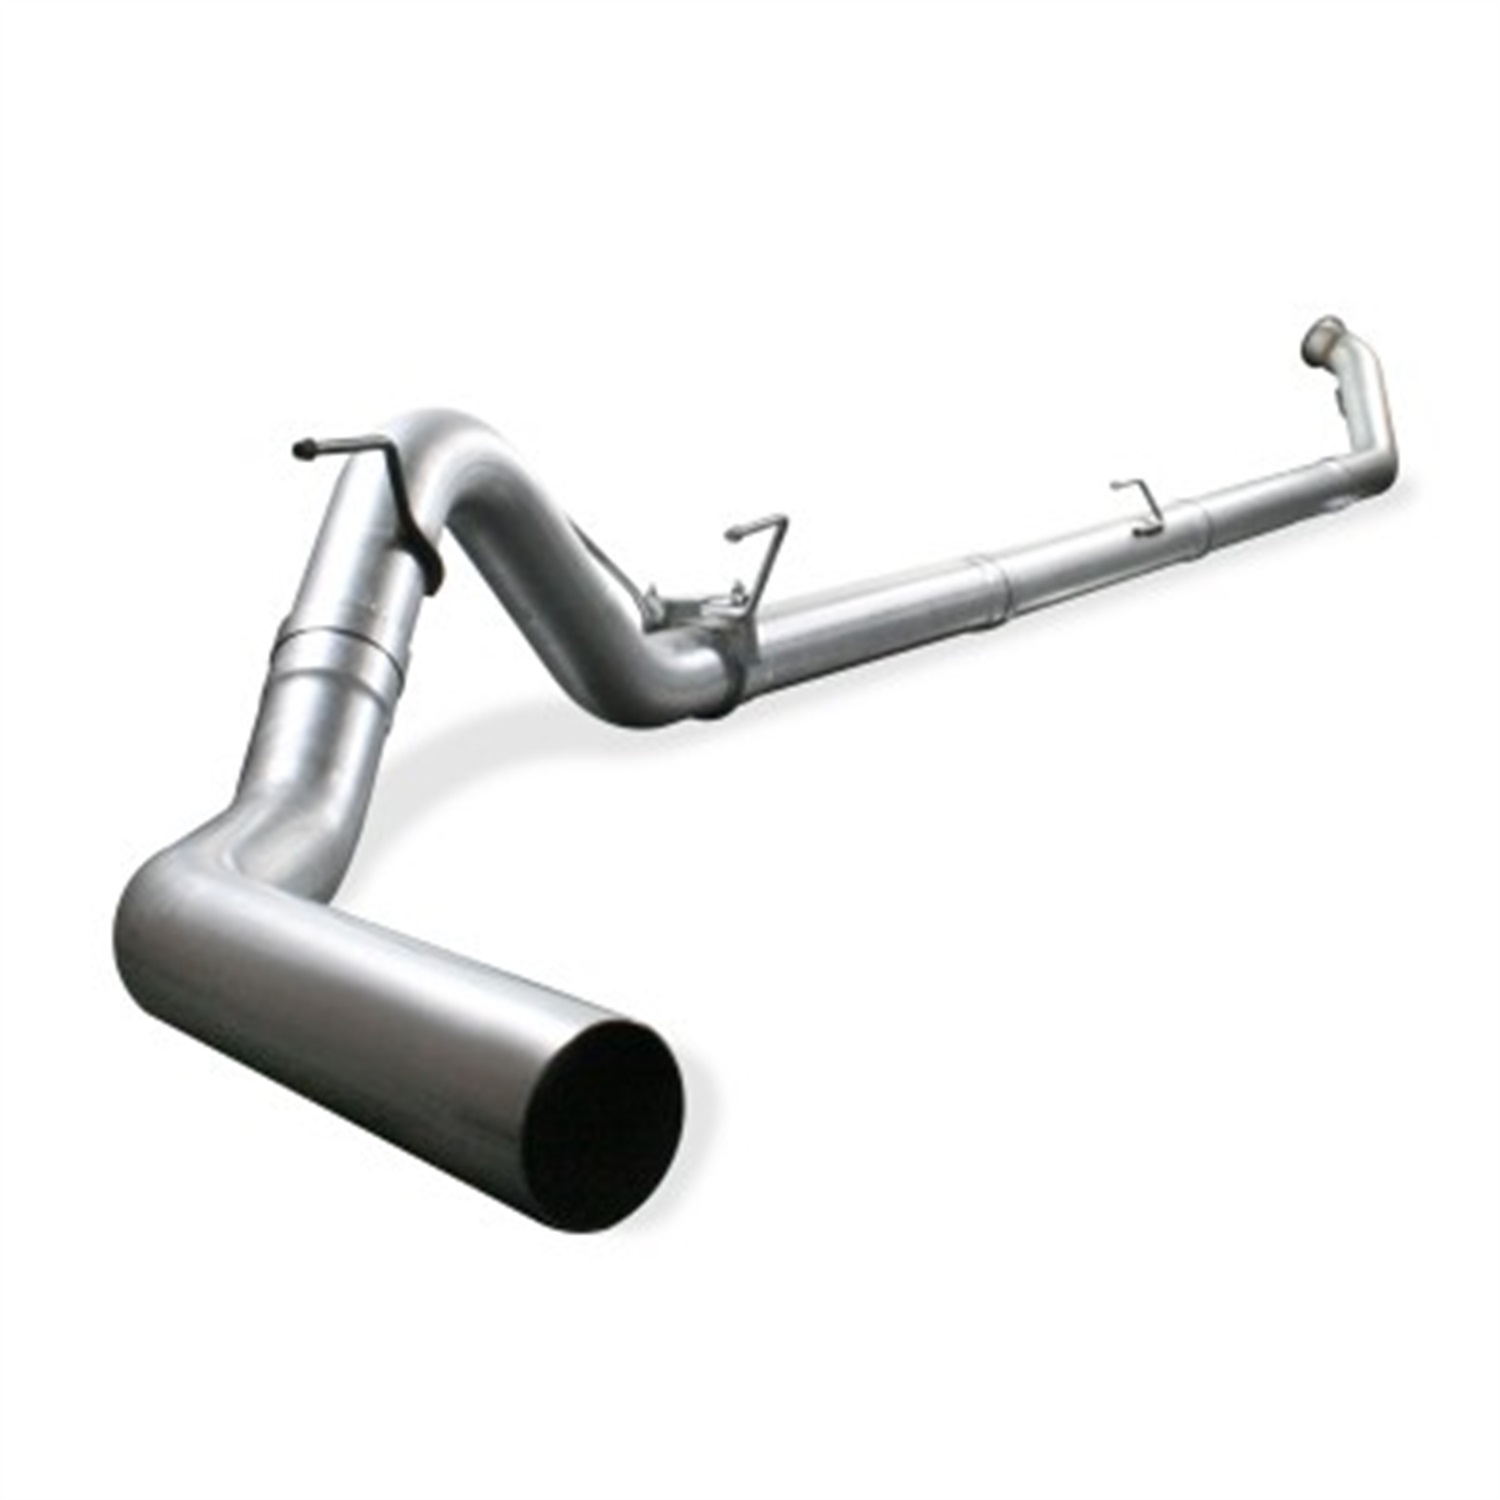 aFe Power aFe Power 49-03001NM ATLAS Turbo-Back Exhaust System Fits 94-97 F-250 F-350